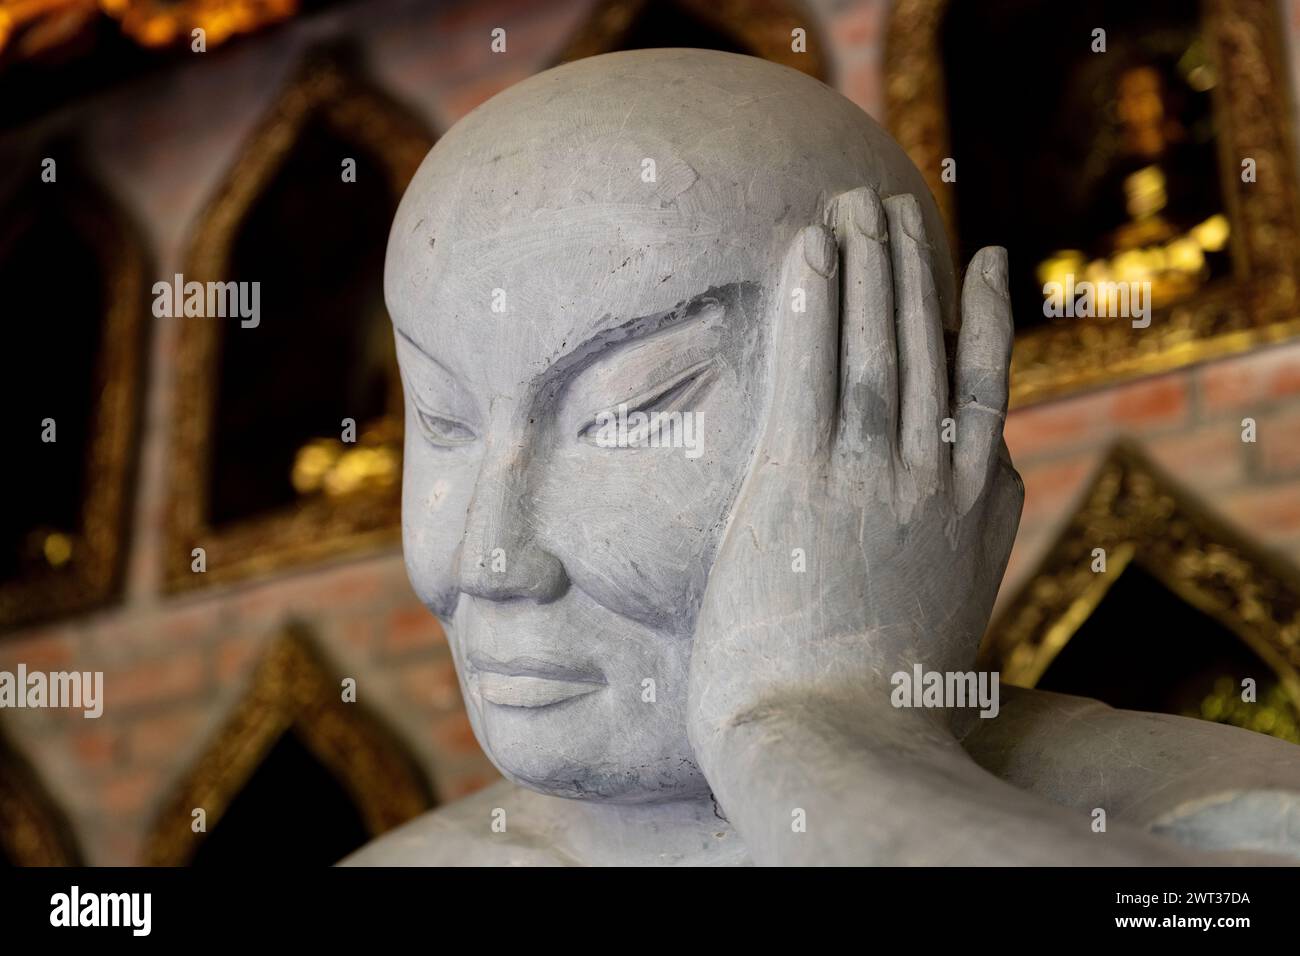 Closeup of the hand and head of one of many stone, Buddhist statues in the Bai Dinh temple pagoda complex in Ninh Binh, northern Vietnam. Stock Photo